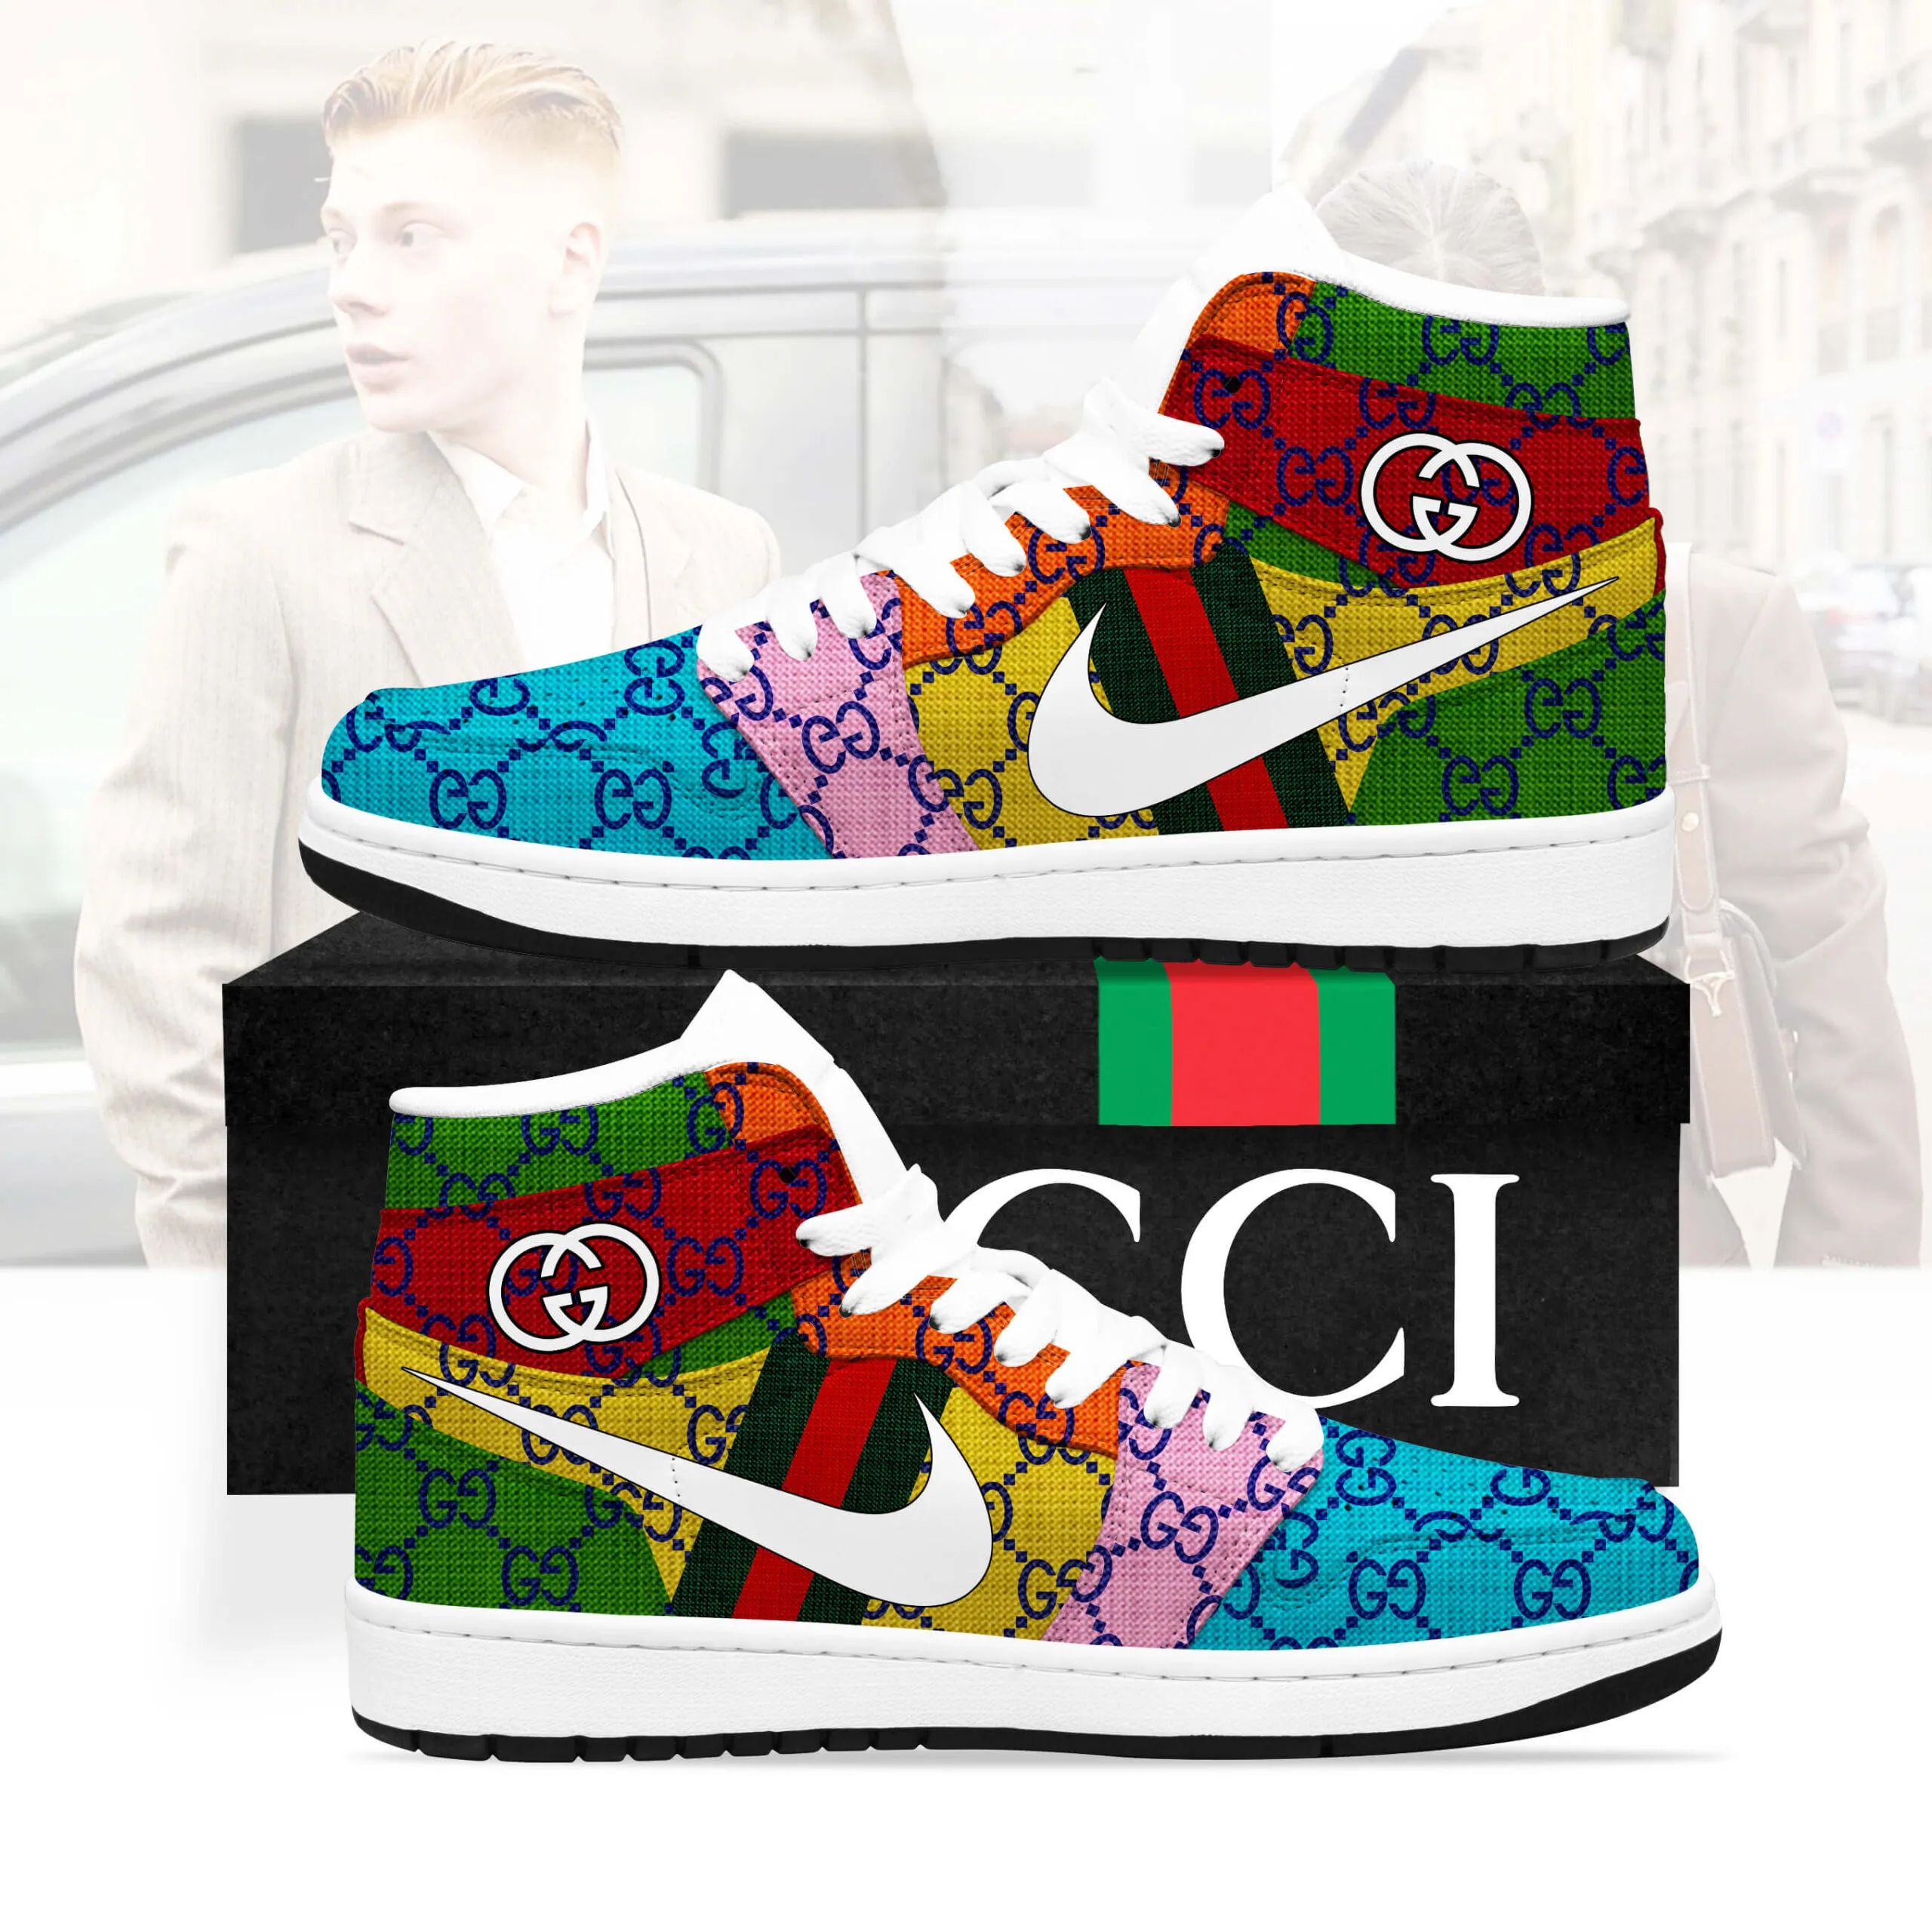 Gucci Colorful High Air Jordan Luxury Fashion Brand Sneakers Shoes